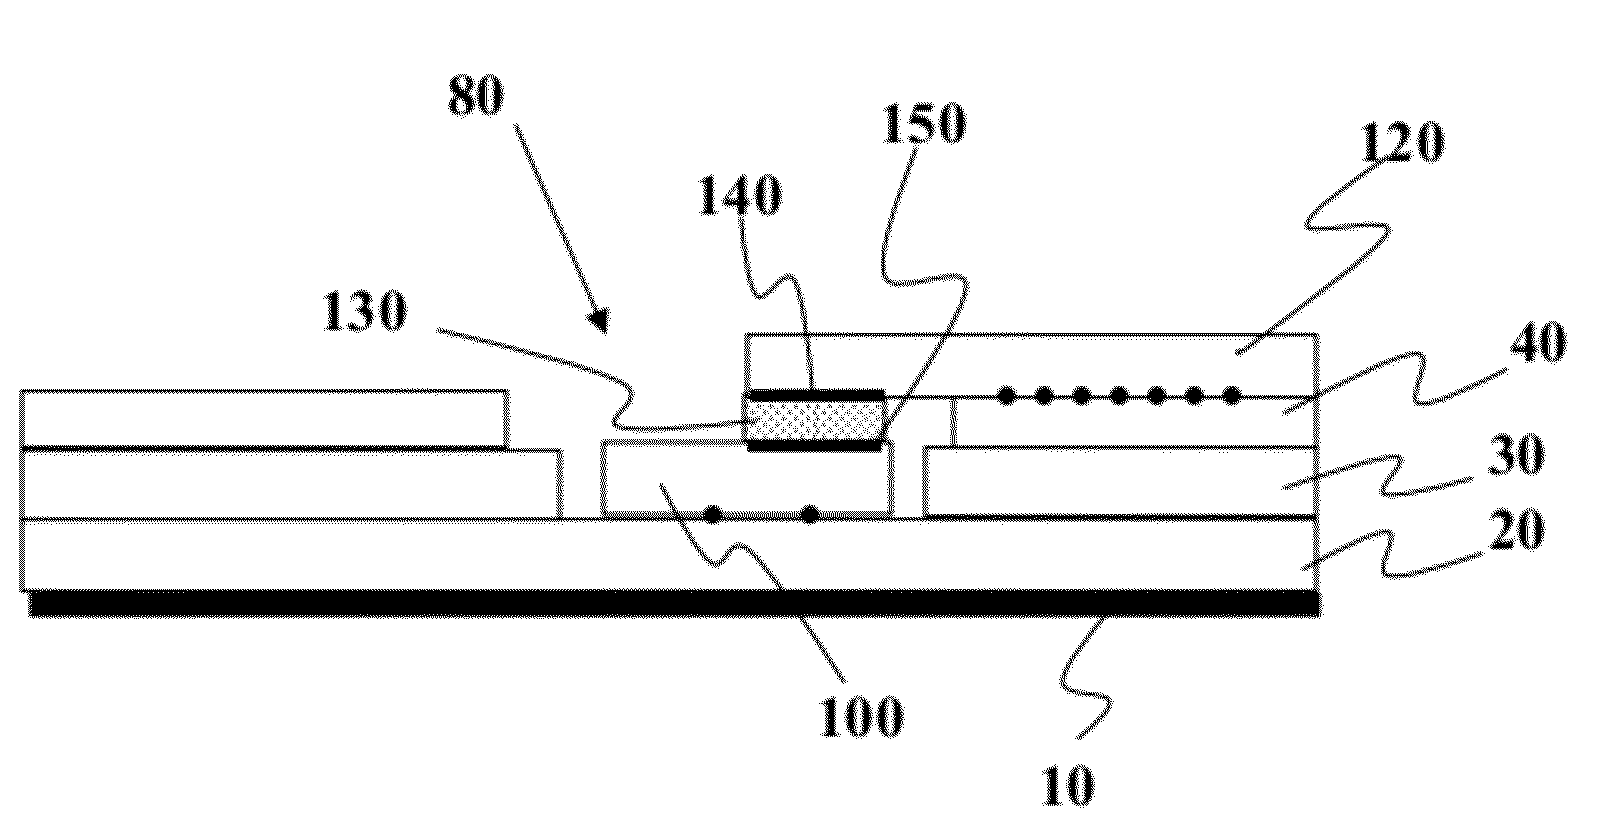 Assembly for electrical breakdown protection for high current, non-elongate solar cells with electrically conductive substrates